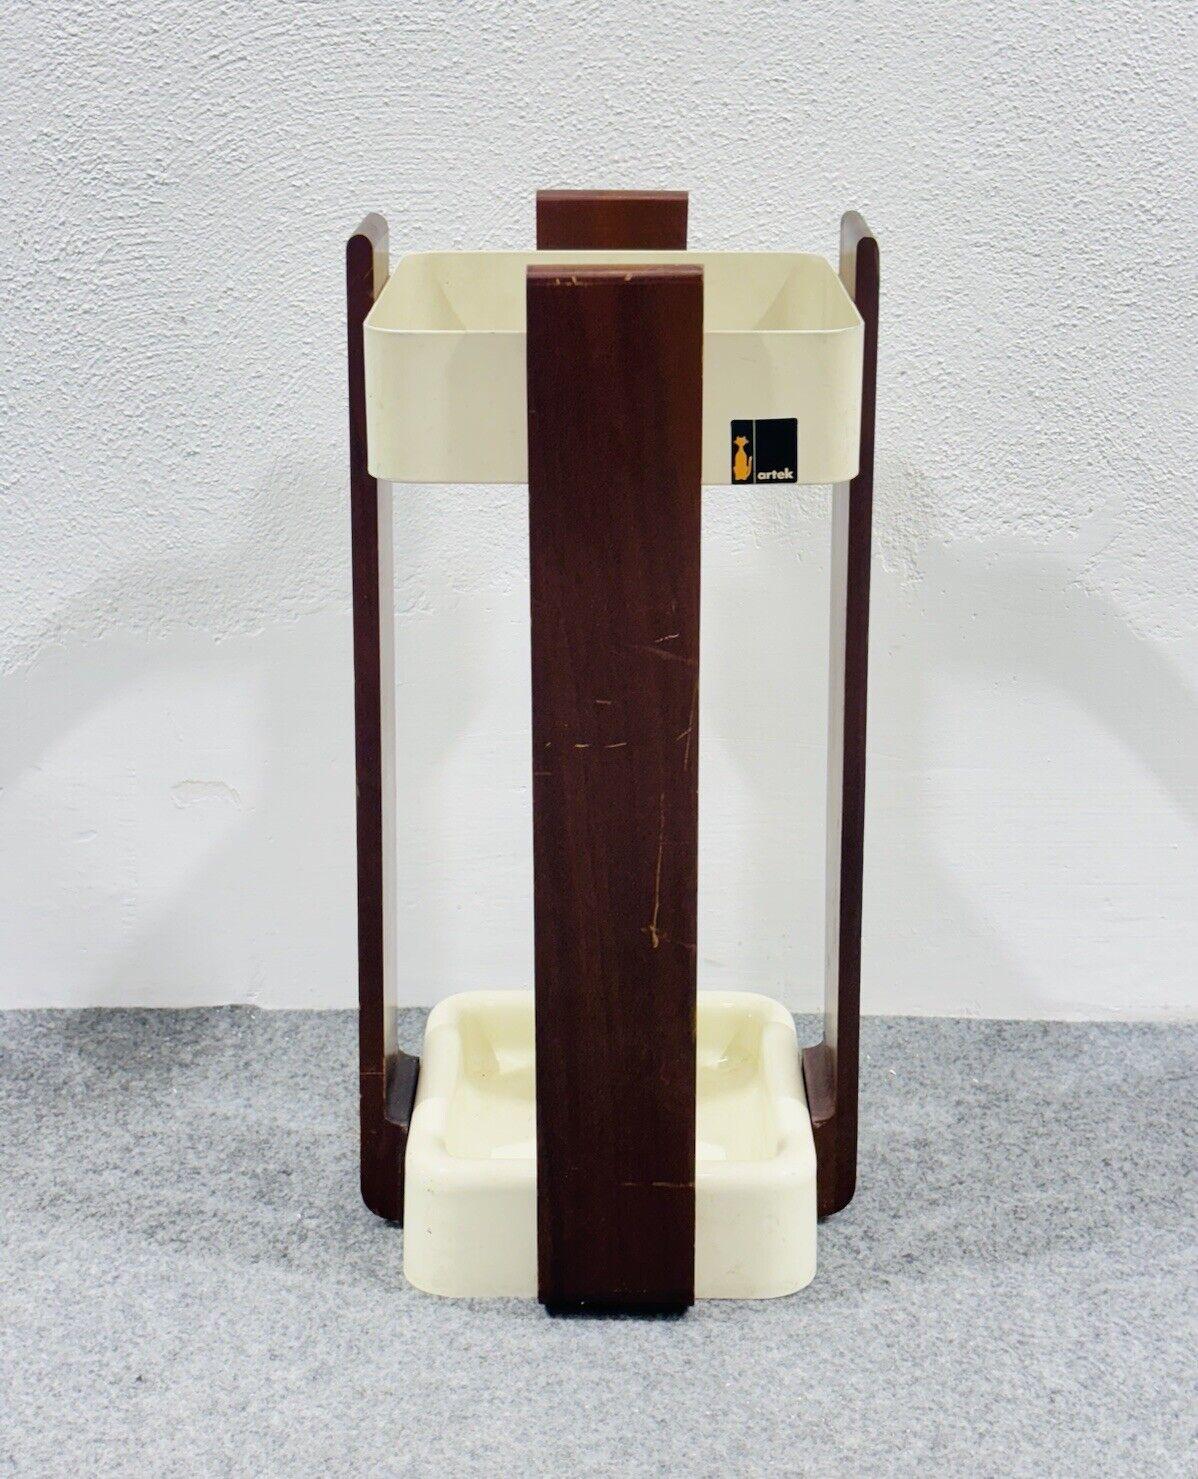 Artek umbrella stand designed by Alvar Aalto in the 1970s.

All-wood frame, ABS bottom.

The item is in good conservative condition, there are no major cosmetic or structural defects to report, just slight and obvious signs of time due to use and